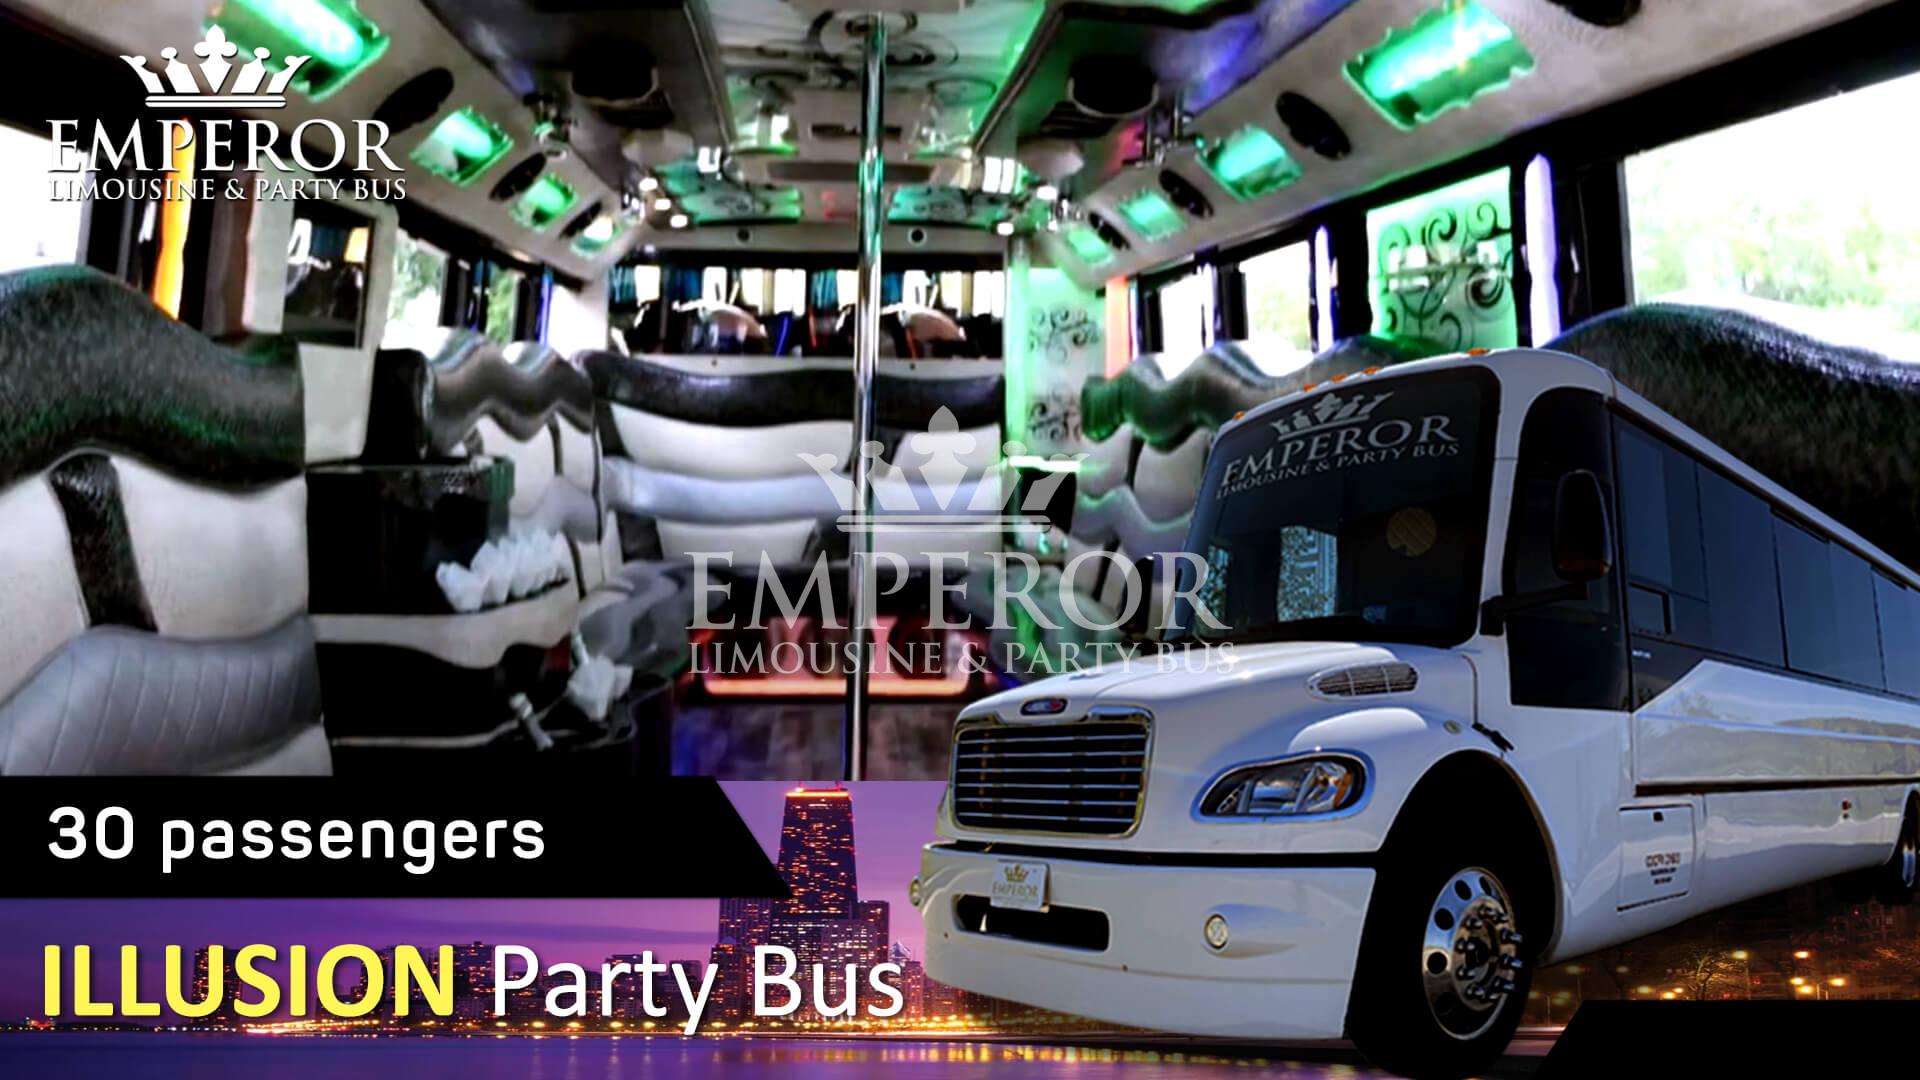 Party bus for corporate event in Chicago - Illusion edition